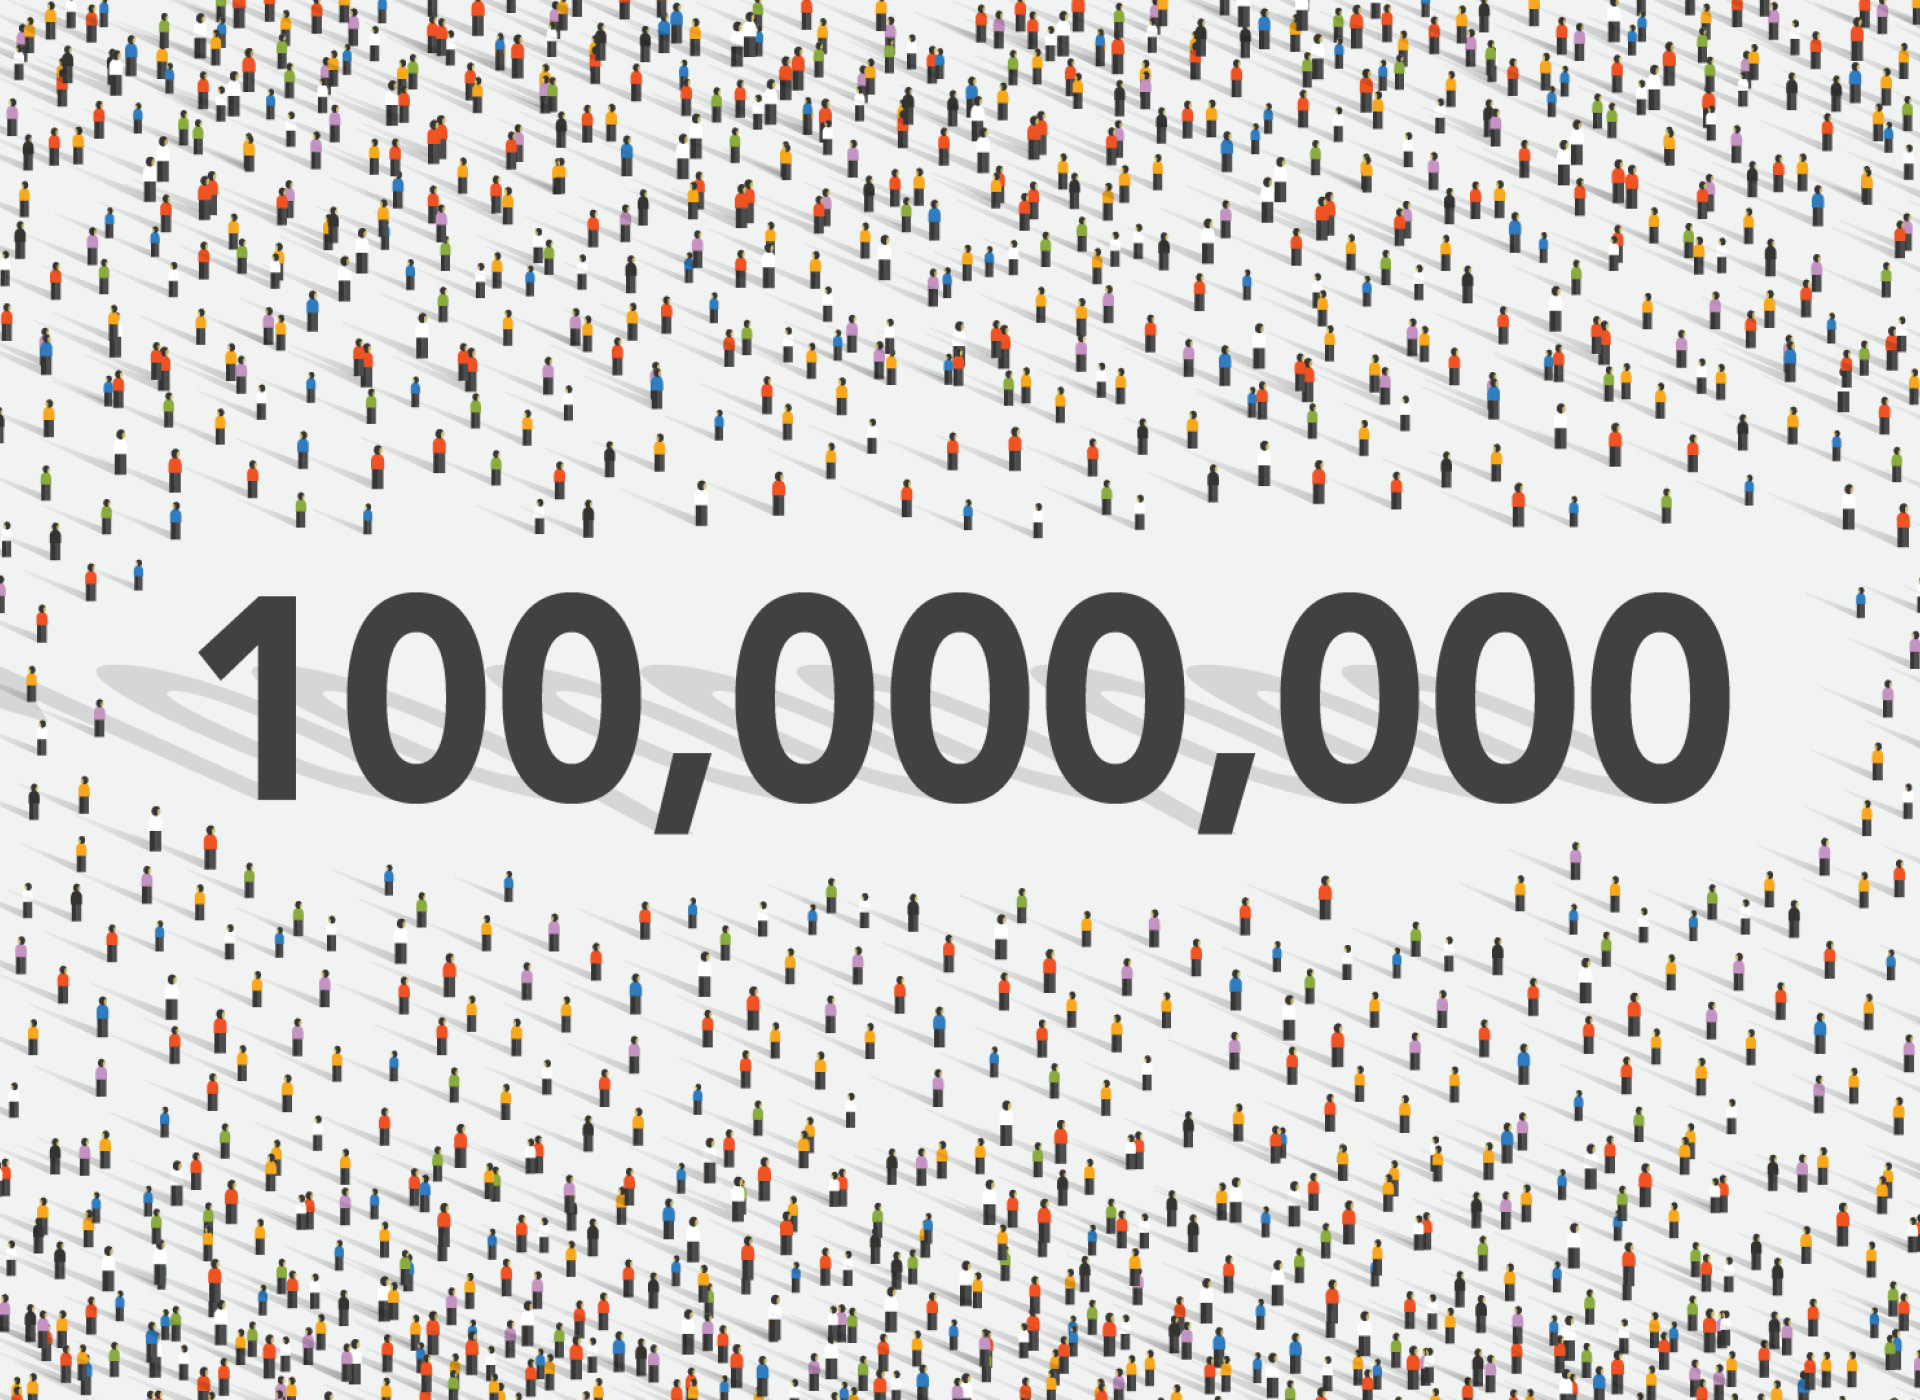 The number 100,000,000 surrounded by cartoon graphic of a mass of people